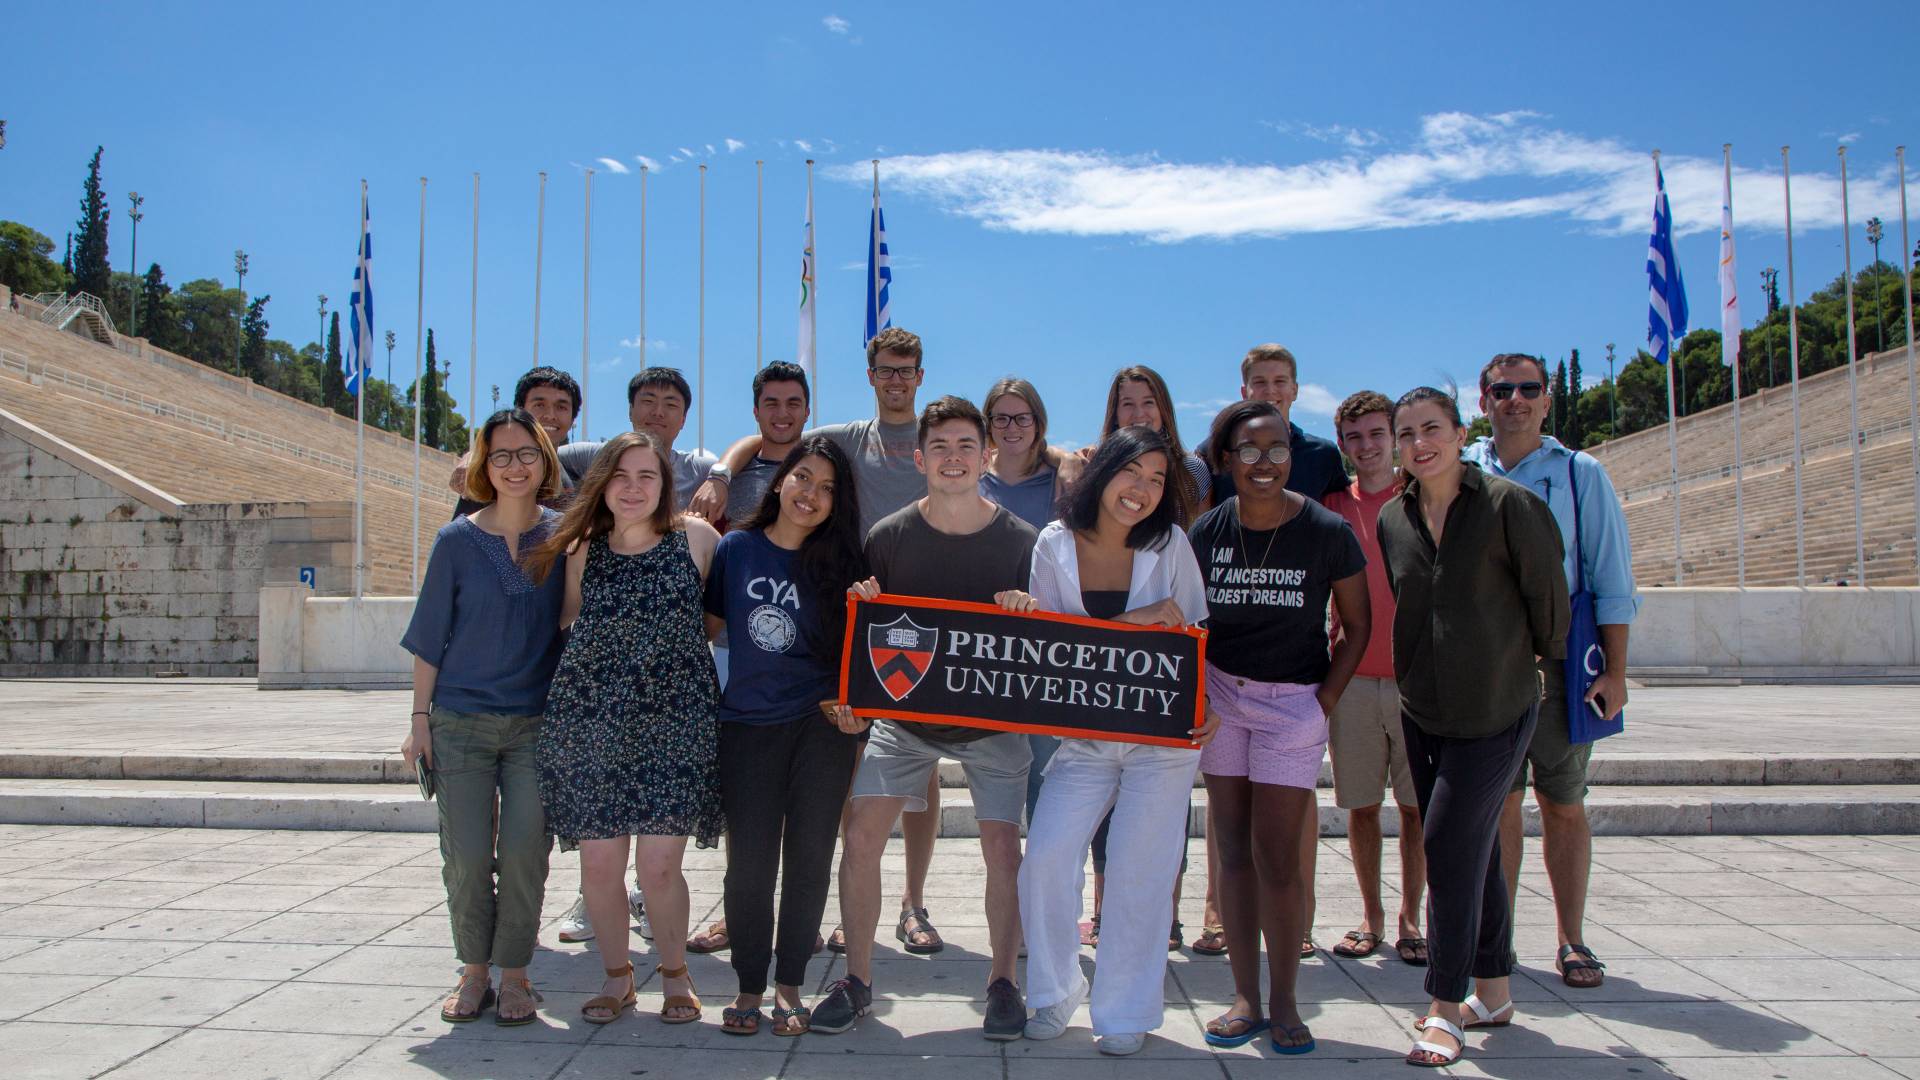 Students and professor standing in front of stadium holding Princeton University banner